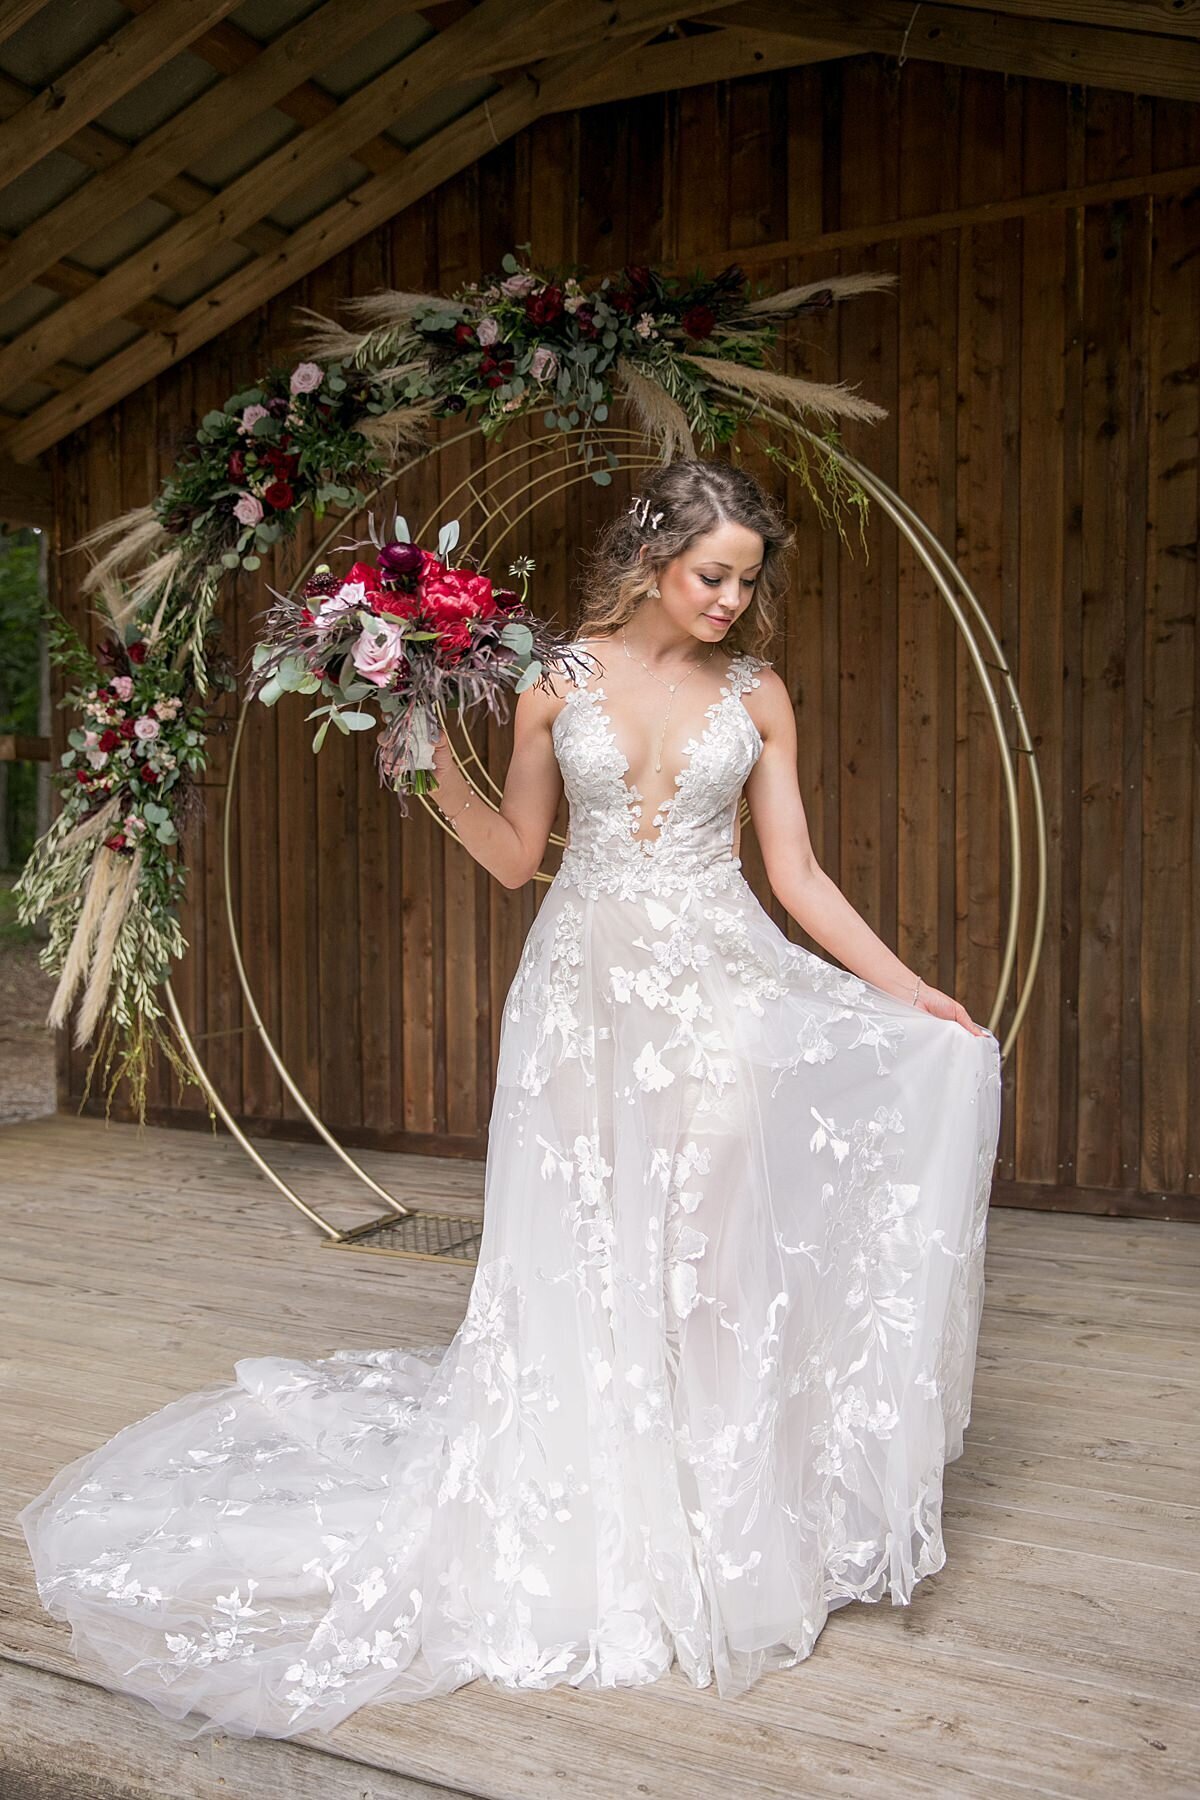 A bride wearing a long lace wedding dress with a deep plunging neckline holding a large bouquet of red peonies, burgundy roses, blush roses and burgundy ranunculus as she stands in front of her round gold metal arbor decorated with pampas grass, red, blush and burgundy flowers as it sits inside a rustic wooded pavilion at Saddle Woods Farm